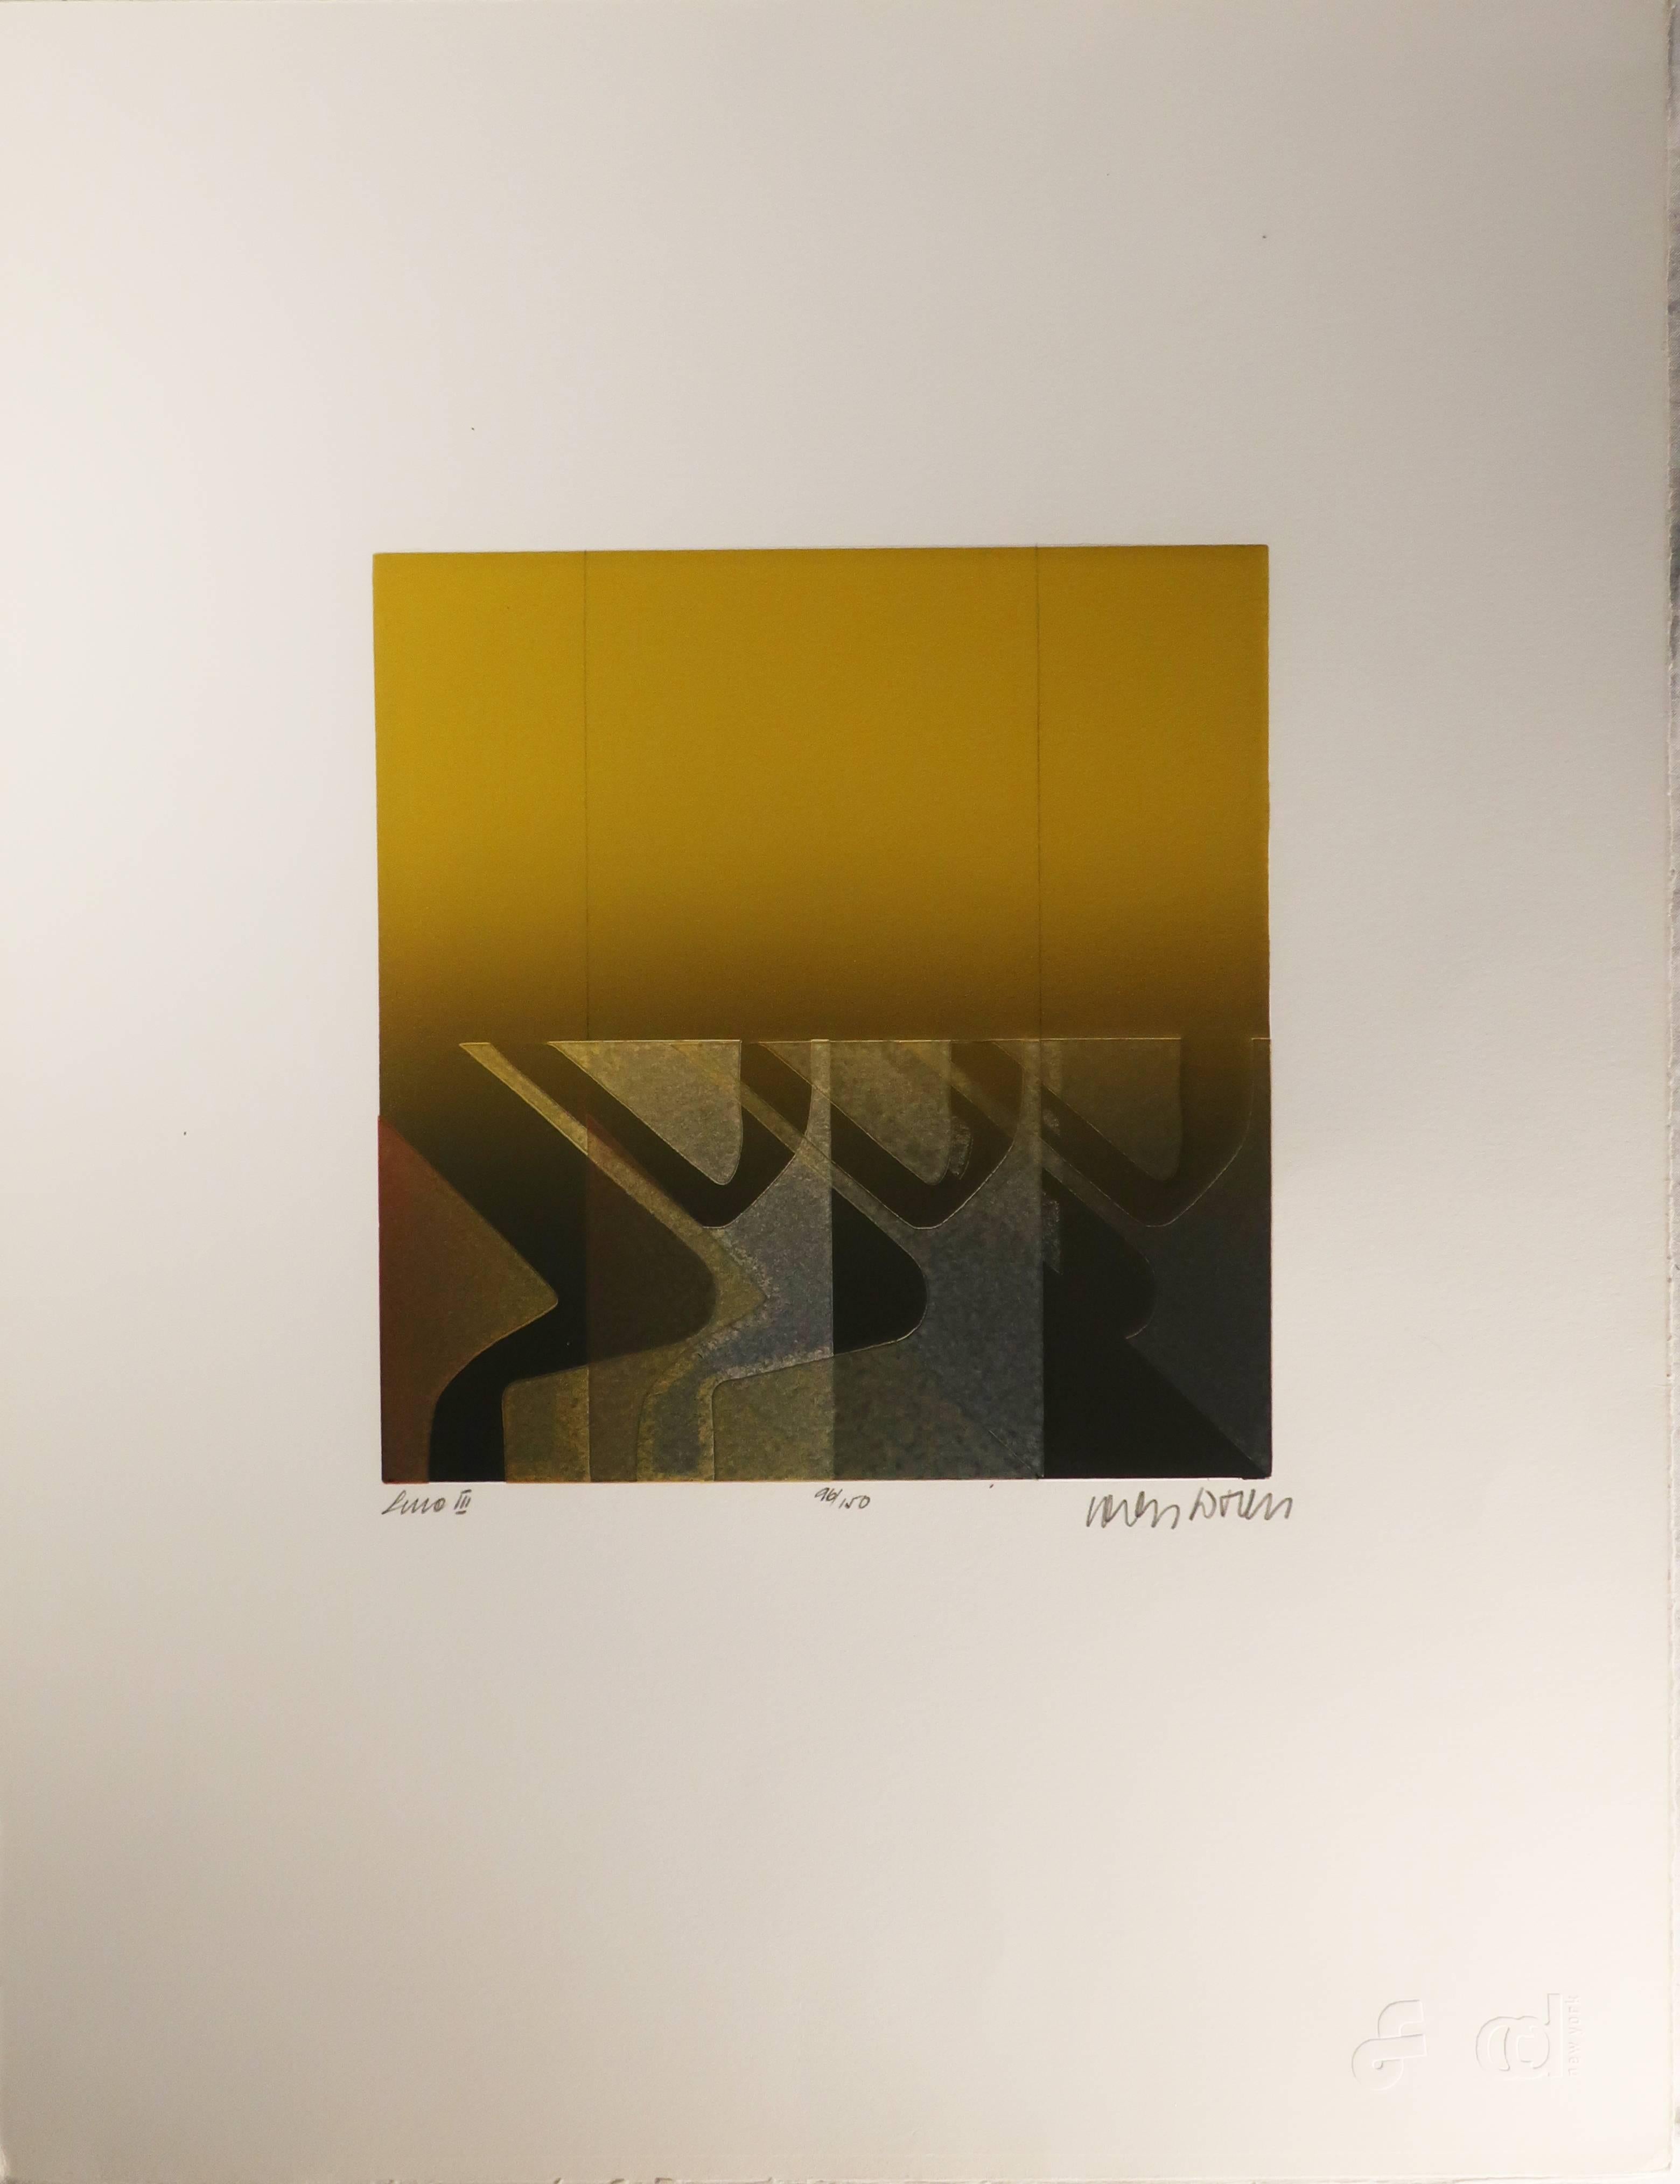 “Line III” is an aquatint etching by Carlos Davila, a Peruvian artist. Aquatint involves an artist making marks on a copper or zinc plate that are capable of holding ink. The inked plate is then passed through a printing press with a piece of paper,